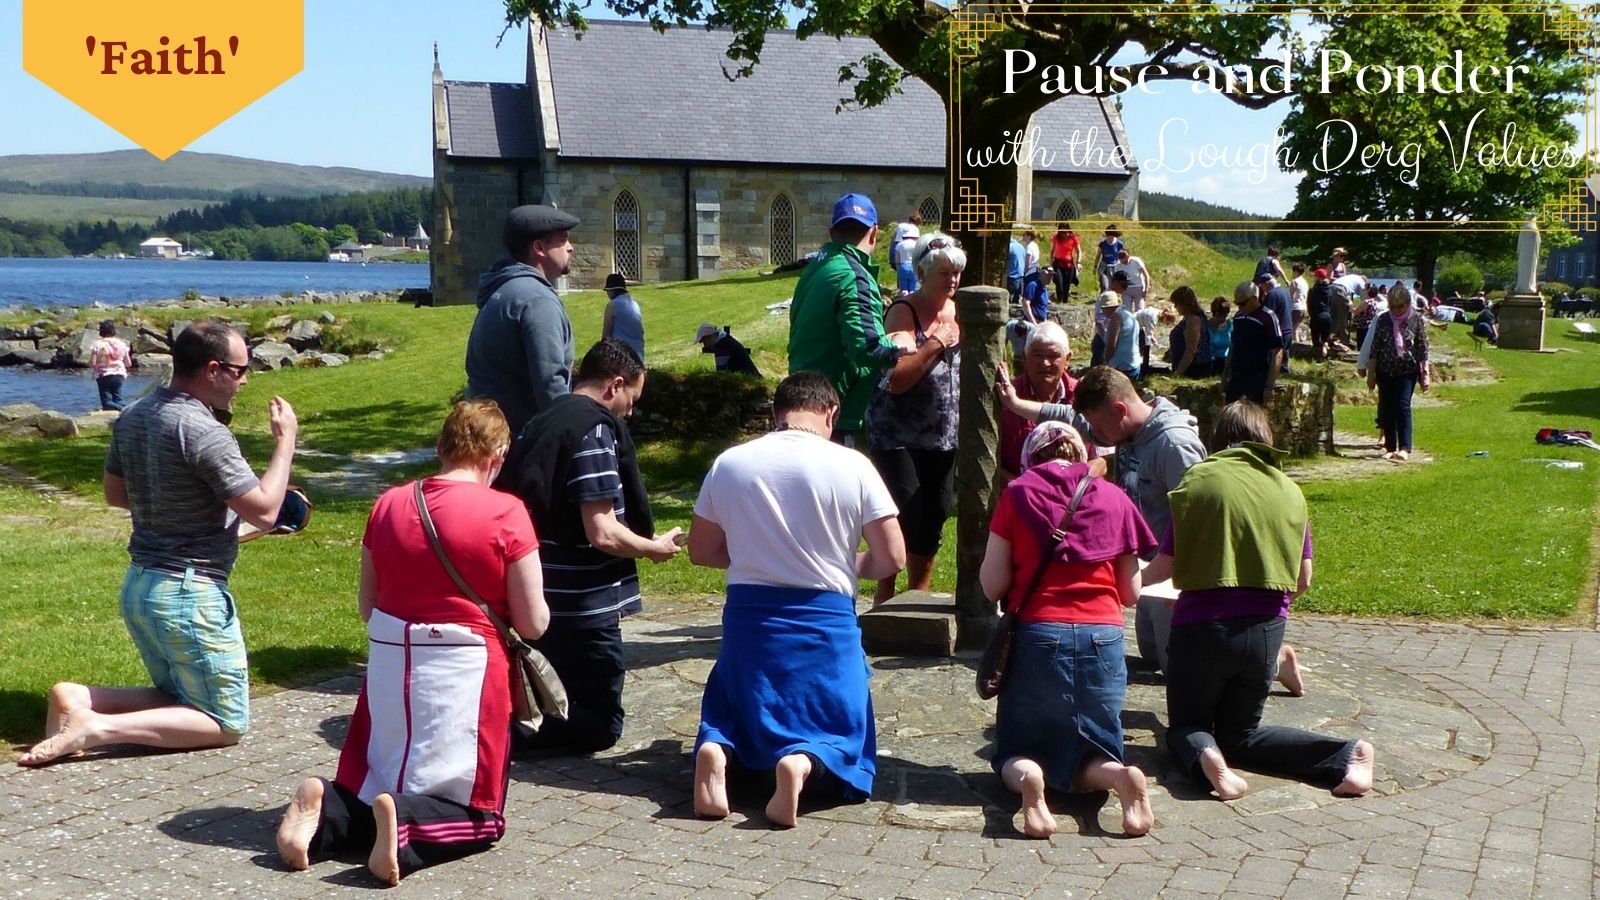 Pause and Ponder with the Lough Derg values - Faith with Fr La